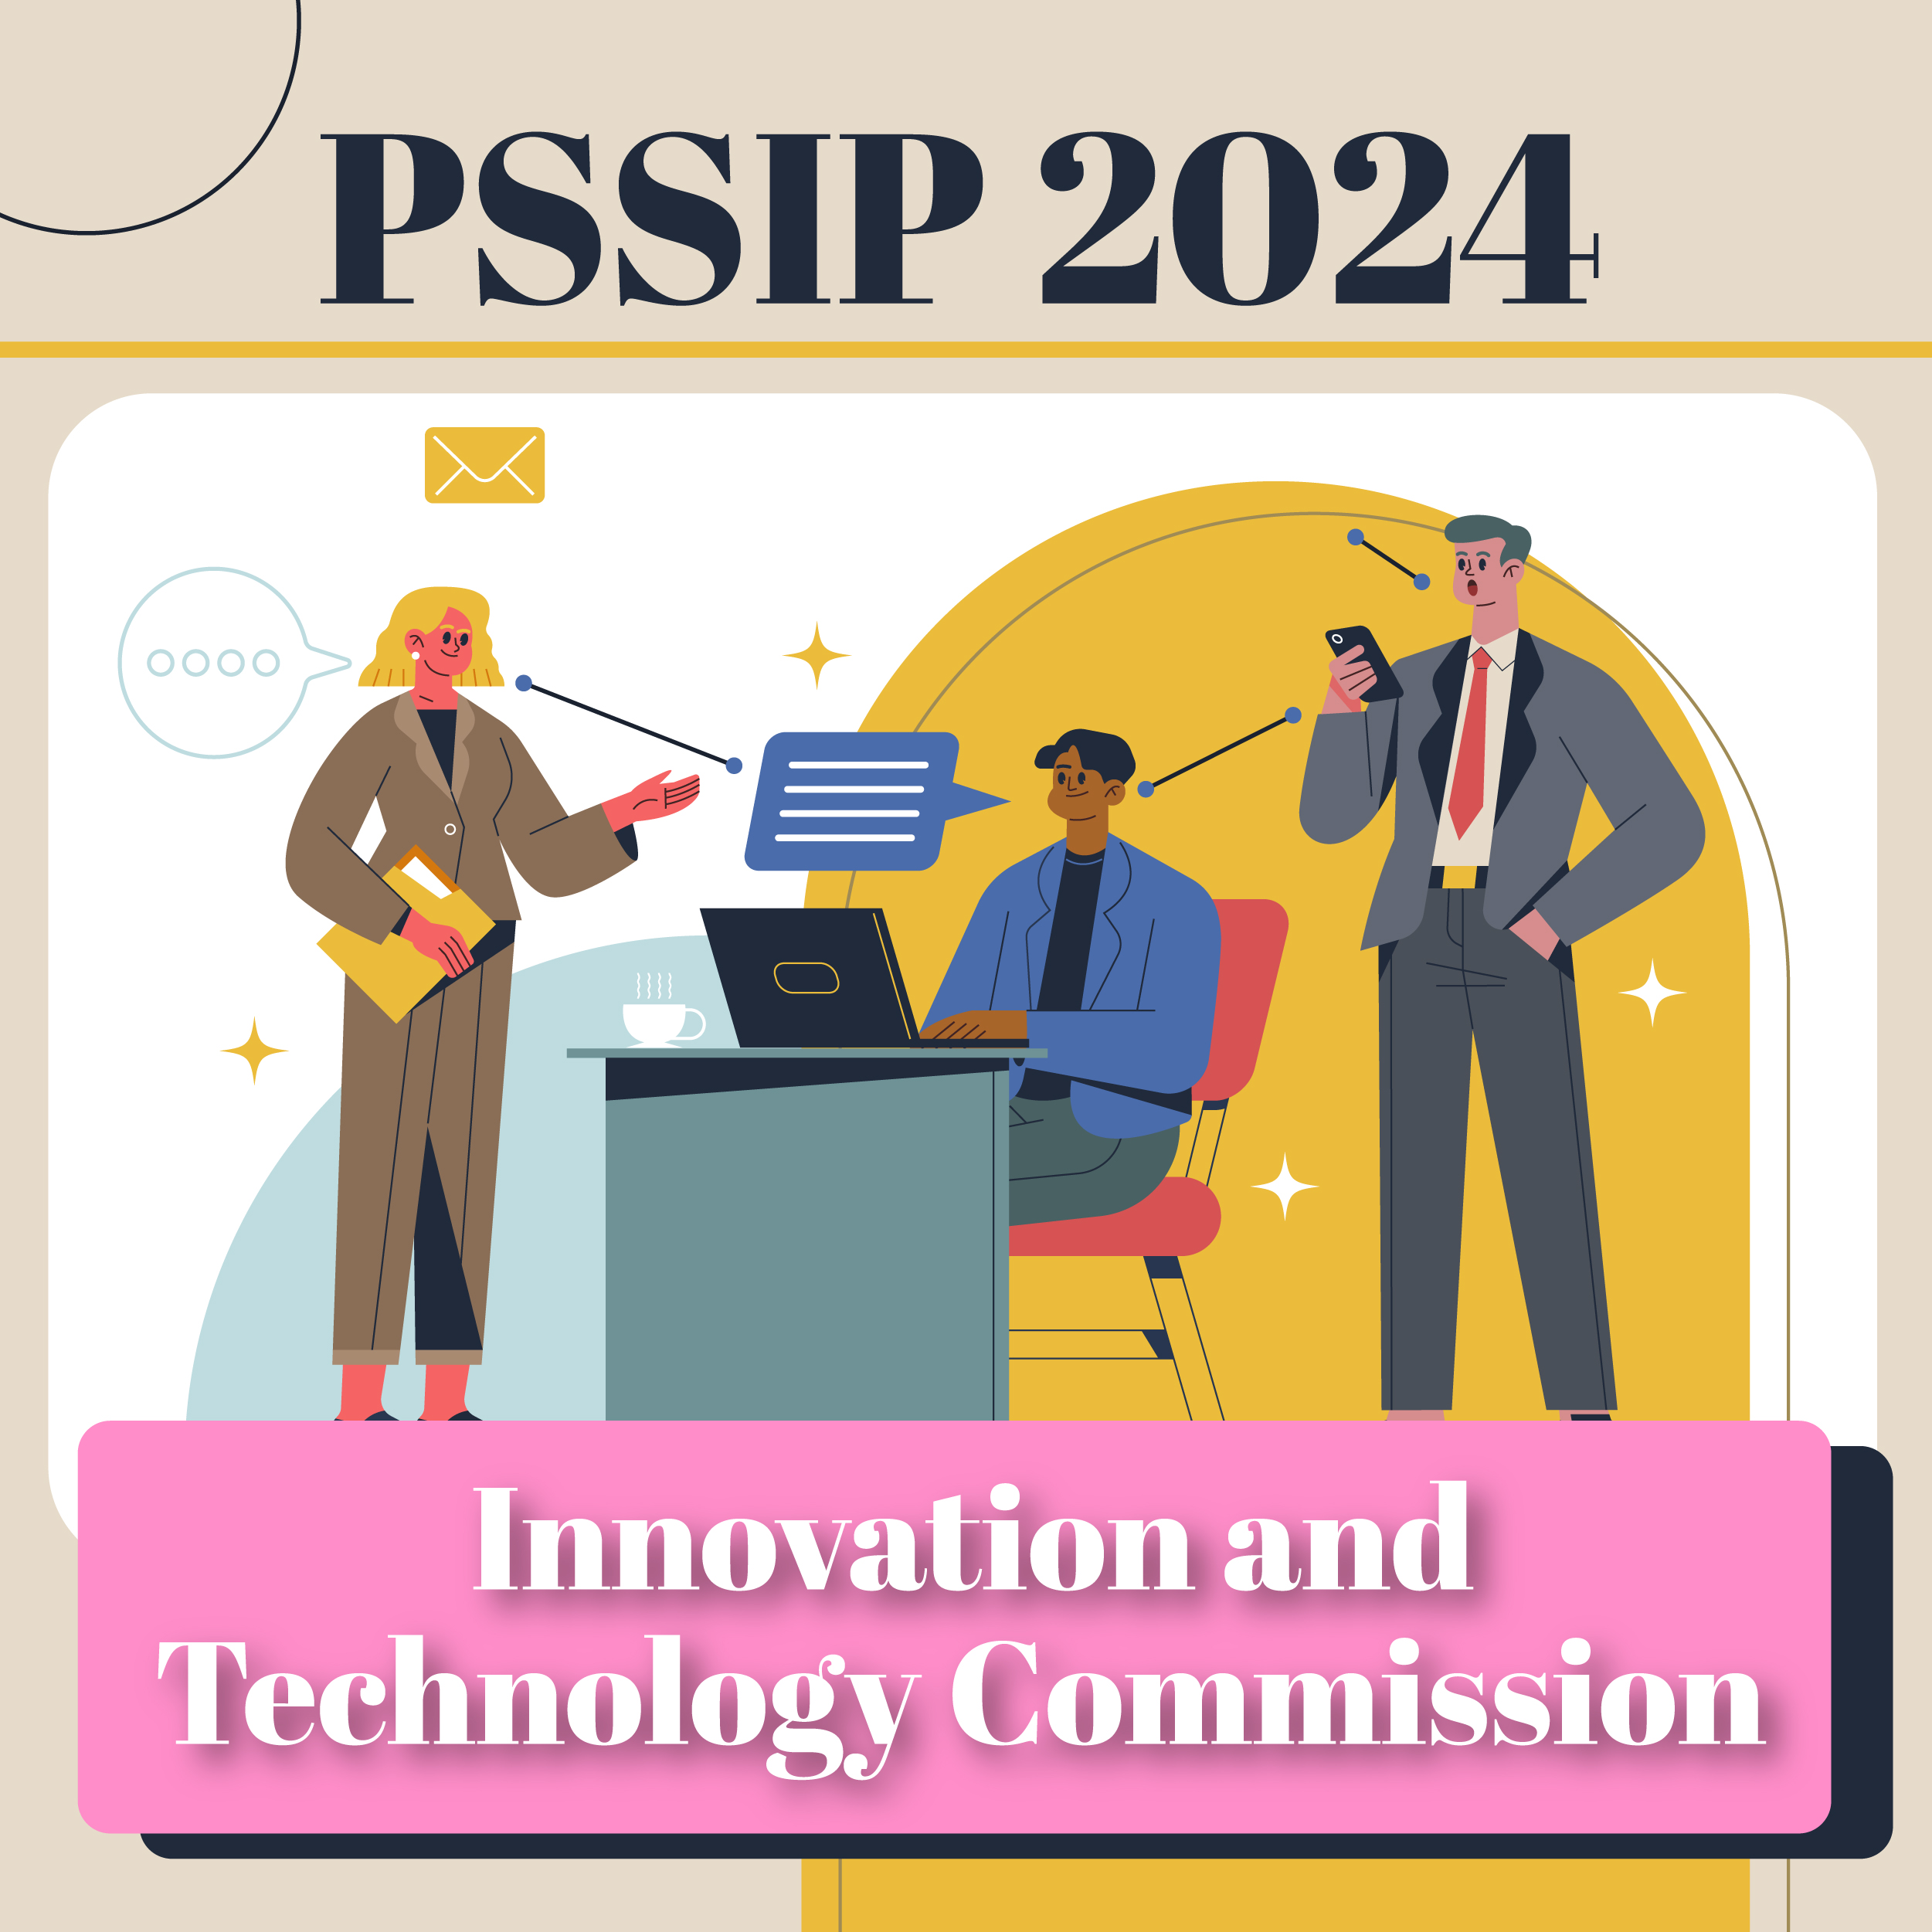 PSSIP2024 – Innovation and Technology Commission